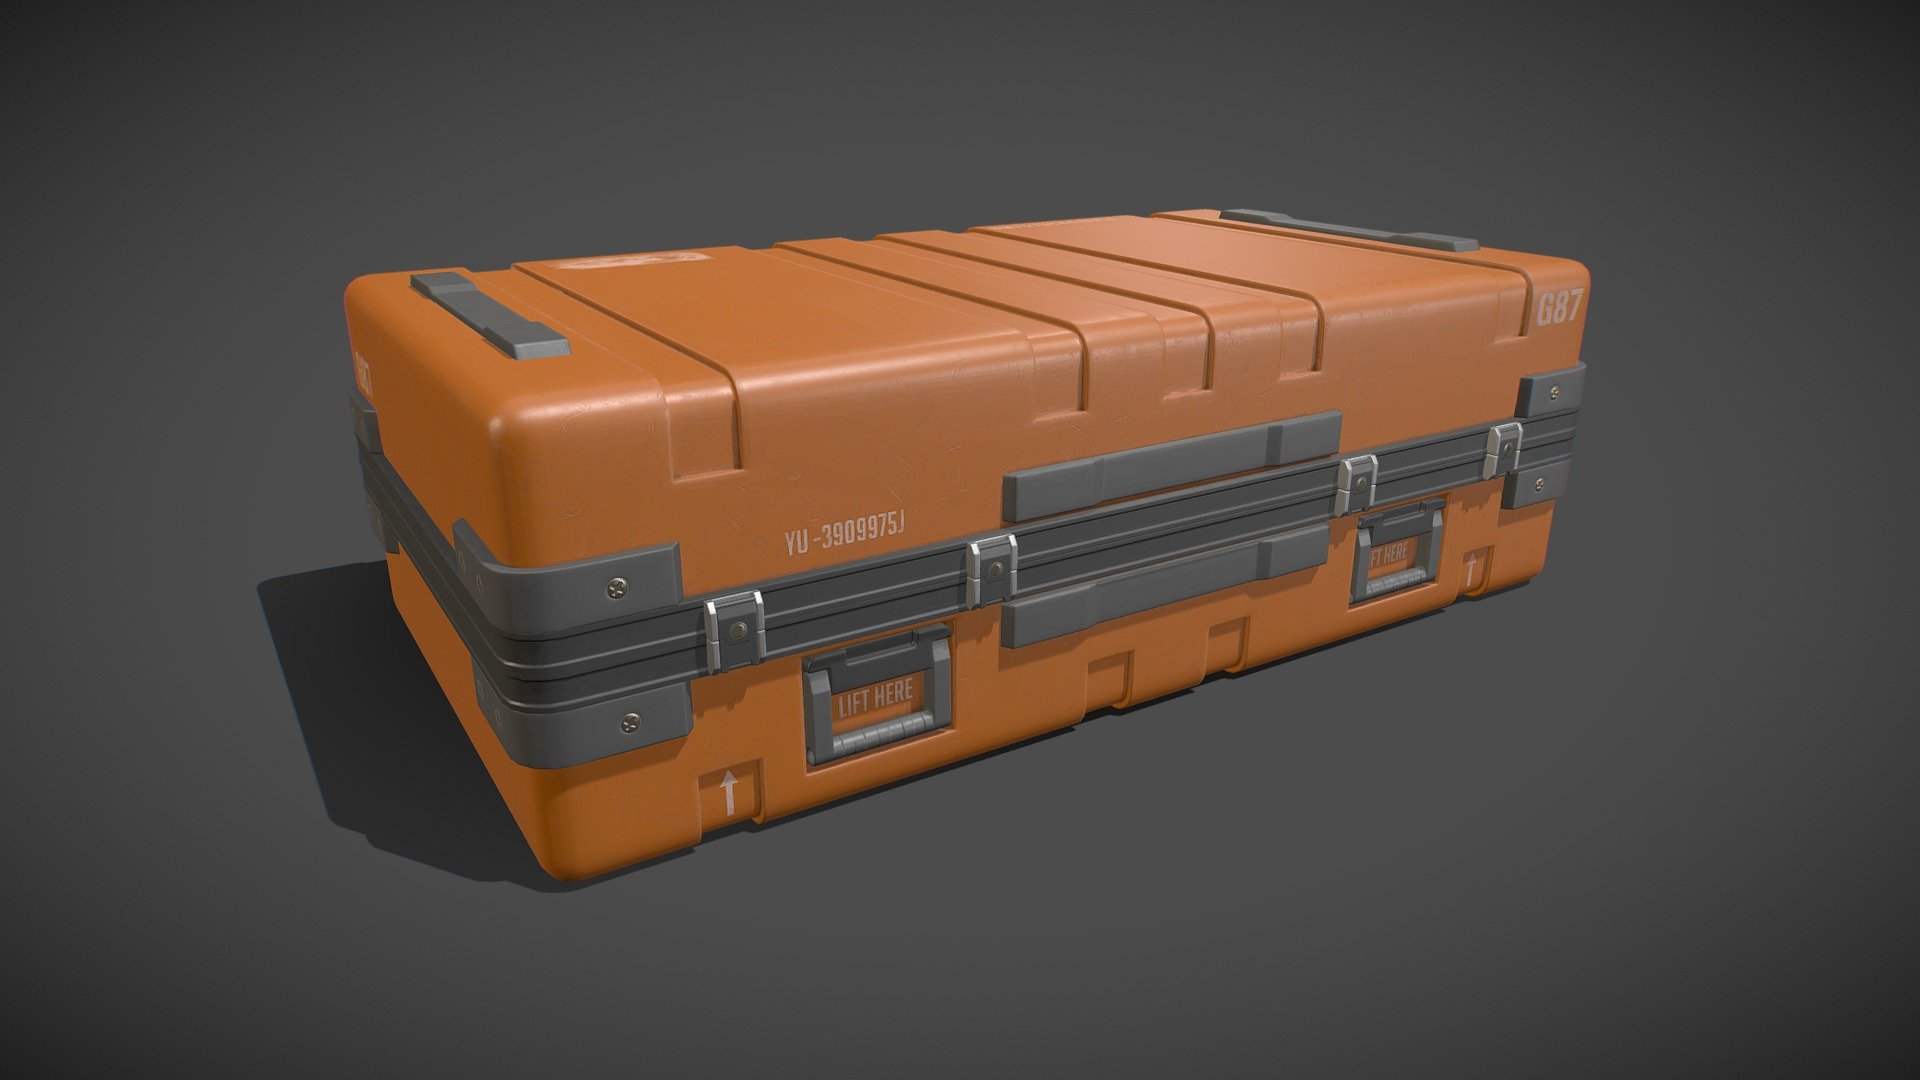 Animated Military Case 10 with PBR Textures and animations (Open/Close). Ideal to loot itens or treasures. Ready to use in any project.

Are you liked this model? Feel free to take a look on my another models! Here

Features:

.Fbx, .Obj, .Uasset and .Blend files.

Low Poly Mesh game-ready.

2 Different colors.

2 Animations (Open/Close).

Rigged.

Real-World Scale (centimeters).

Unreal Project 4.20+

Tris Count: 5,490.

Number of Textures: 6

Number of Textures (UE4/UE5): 4

Skeletal Mesh with custom collision for Unreal Engine 4 (Handmade) (UE4/UE5).

PBR Textures (4096x4096) (PNG).

Type of Textures: Base Color, Roughness, Metallic, Normal Map and Ambient Occlusion (PNG)

Combined RMA texture (Roughness, Metallic and Ambient Occlusion) for Unreal Engine 4 (PNG) 3d model